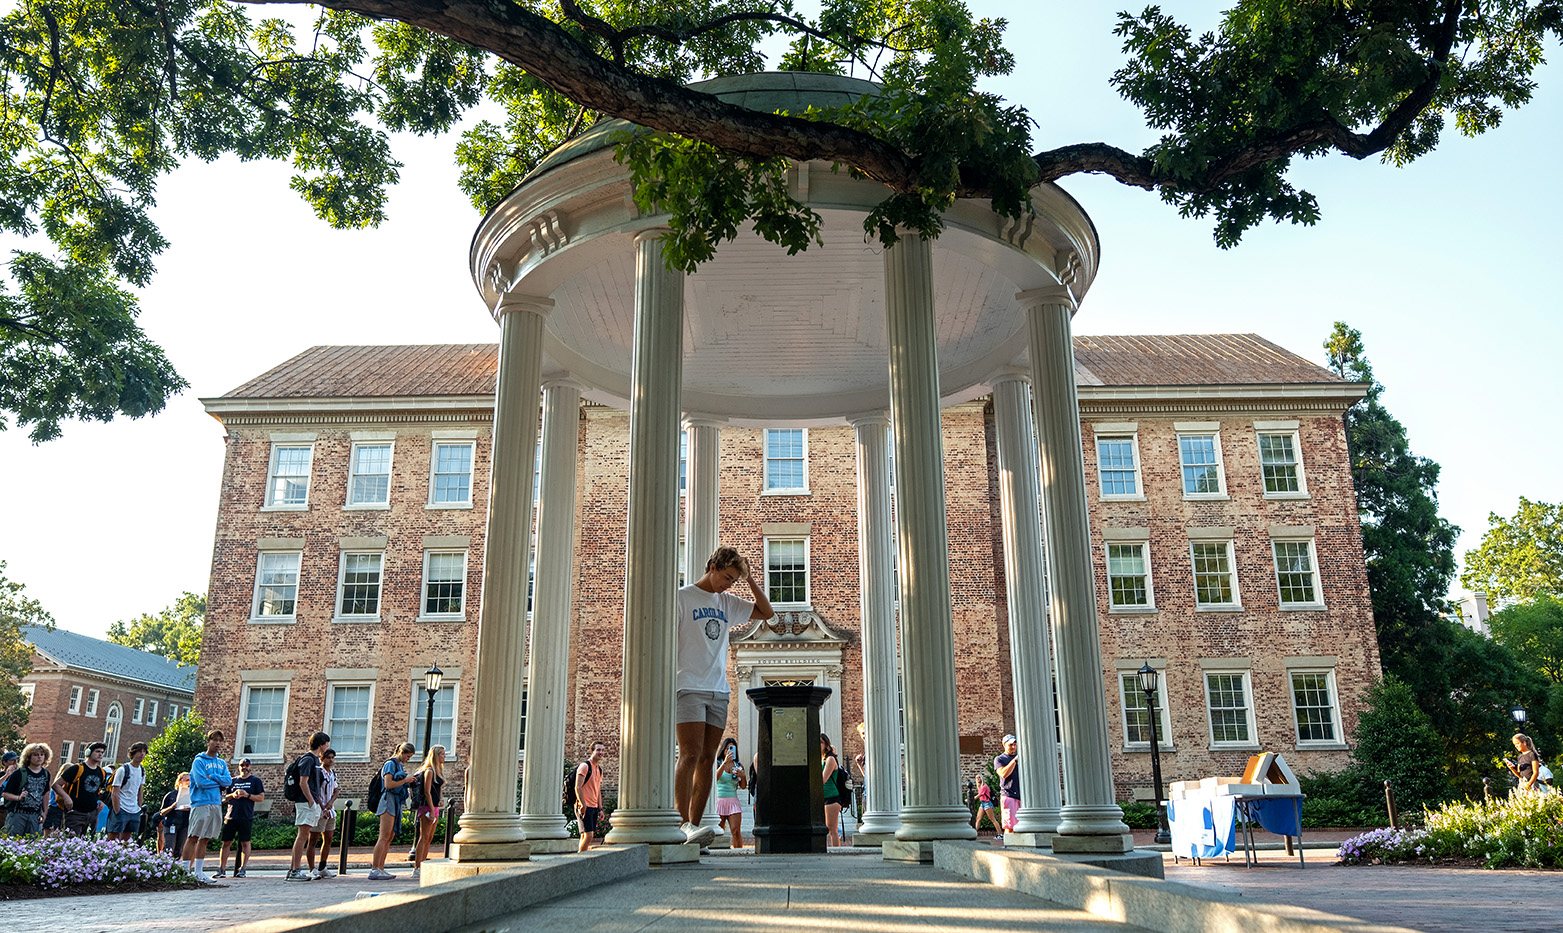 A student approaches the fountain of the Old Well on the campus of UNC-Chapel Hill